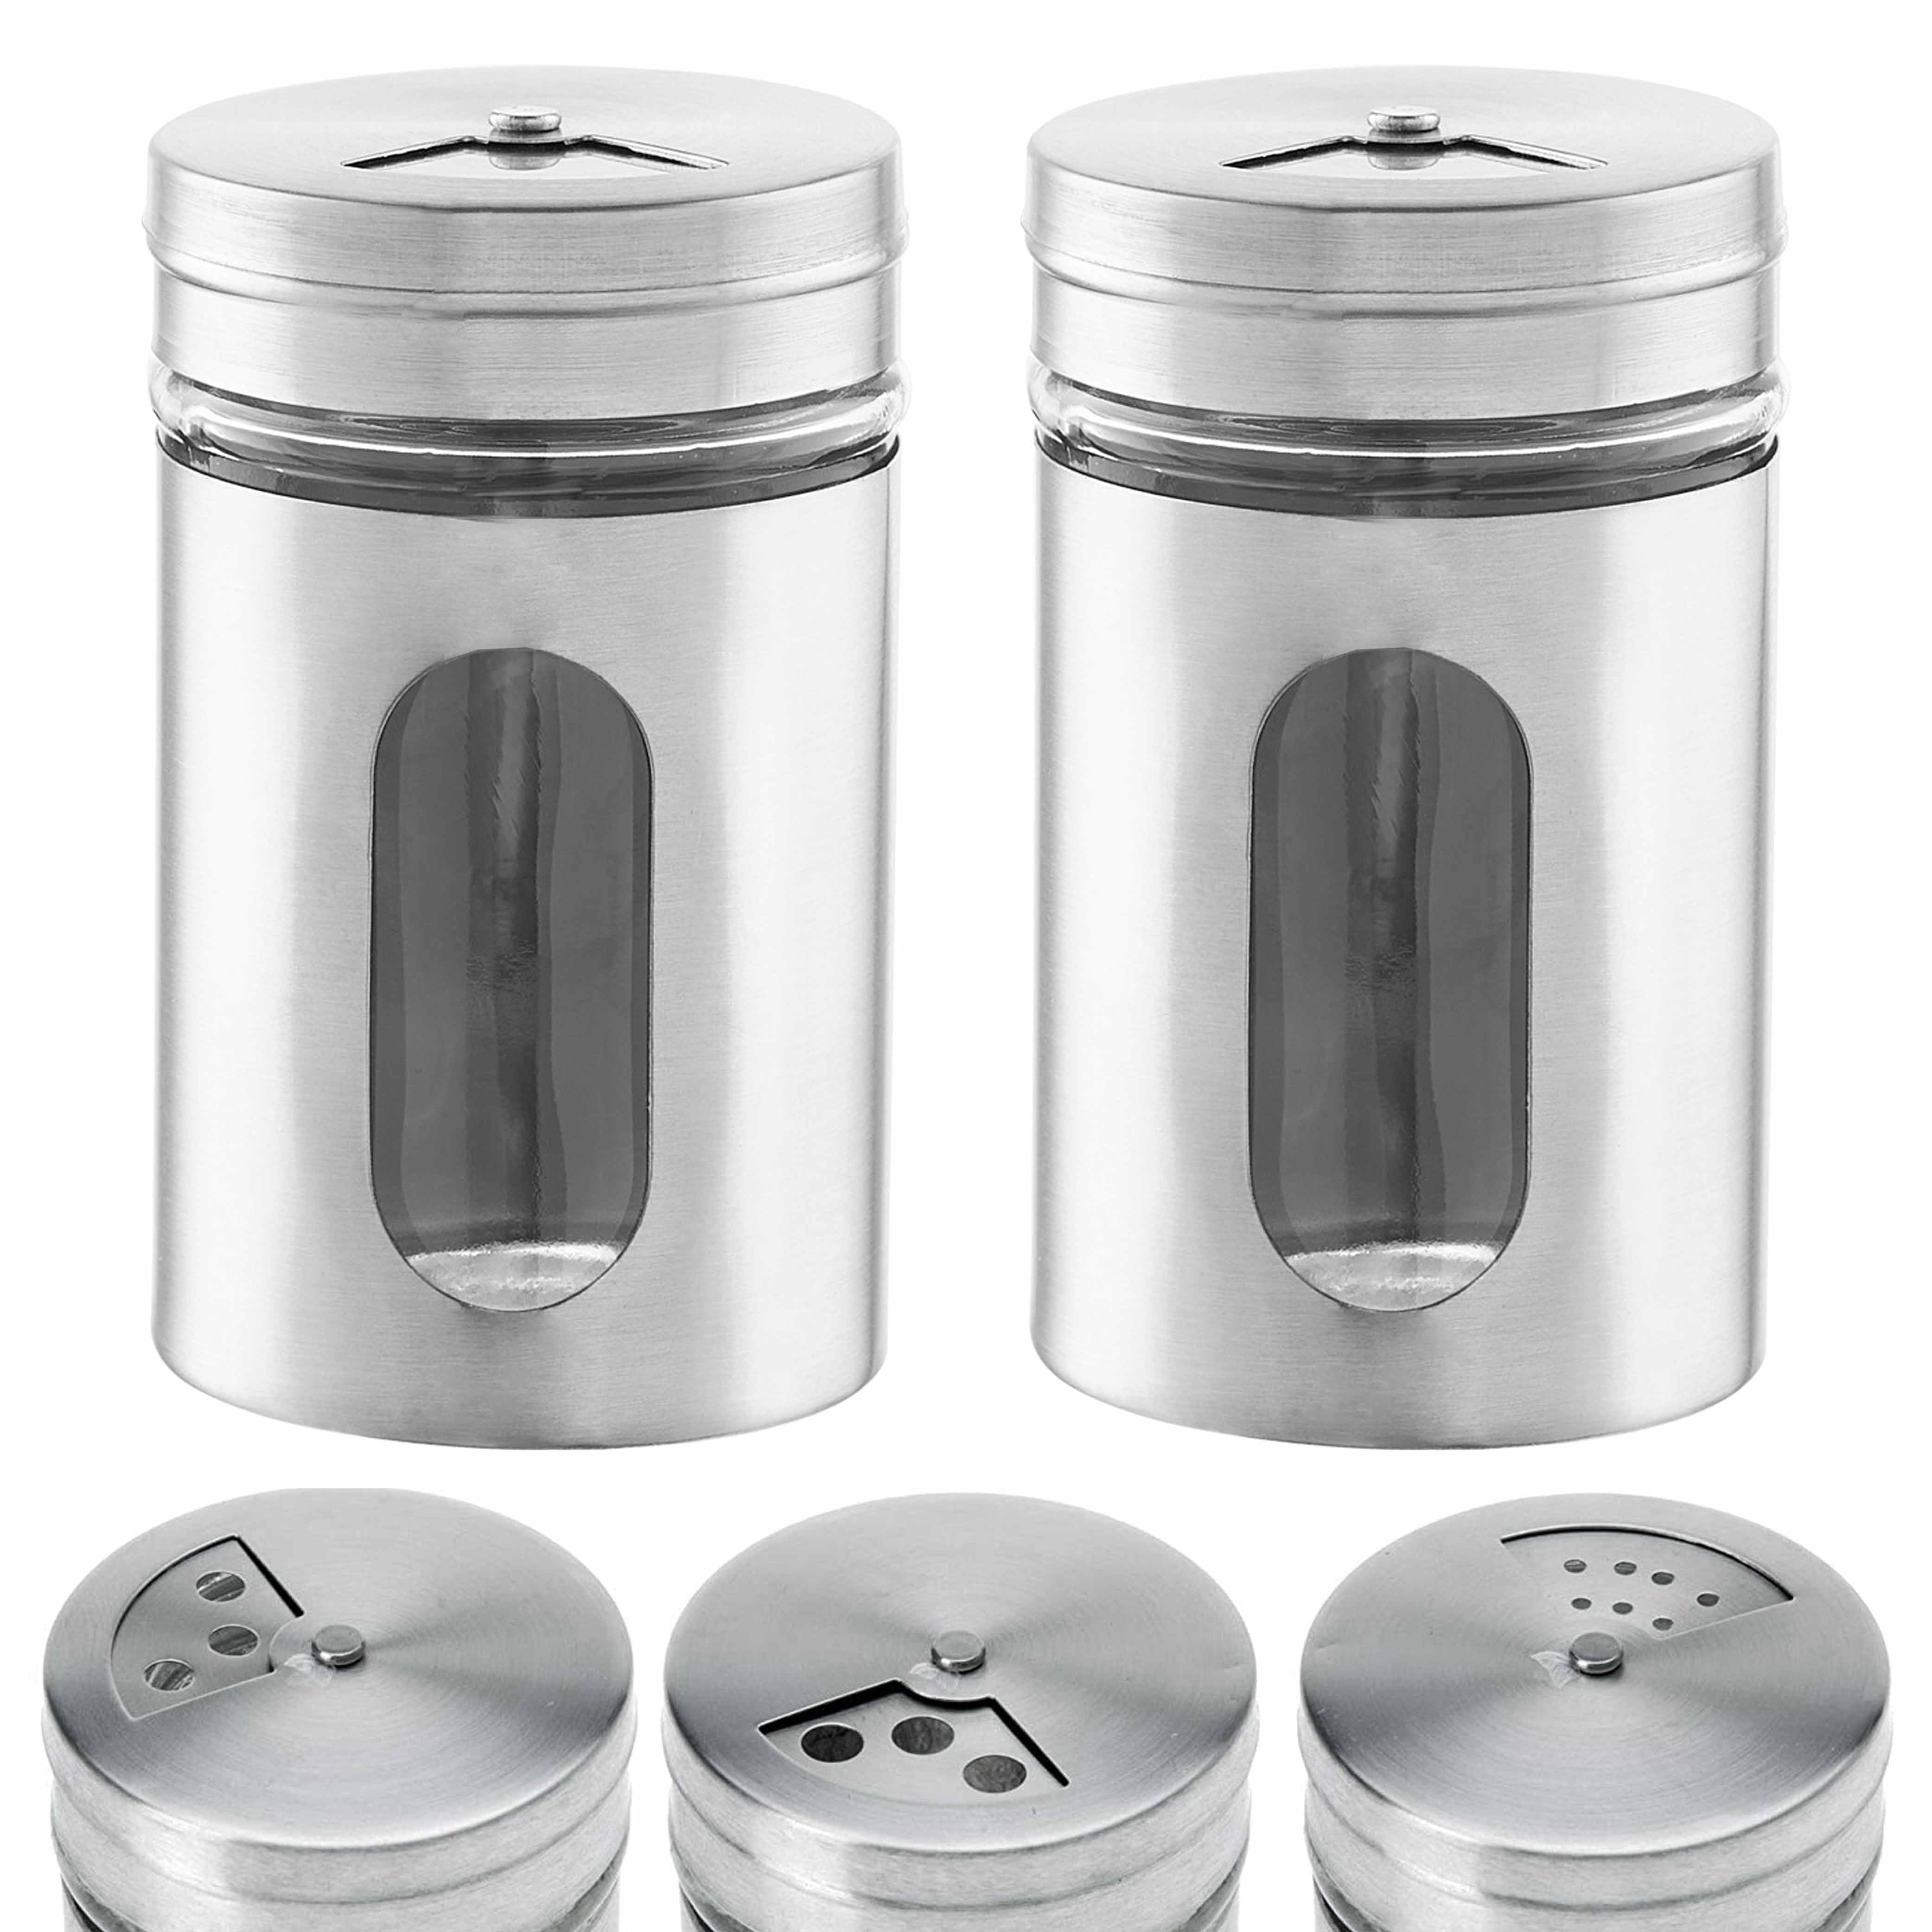 Sleek Electric Salt and Pepper Shaker Set – Spice Up Your Kitchen! -  household items - by owner - housewares sale 